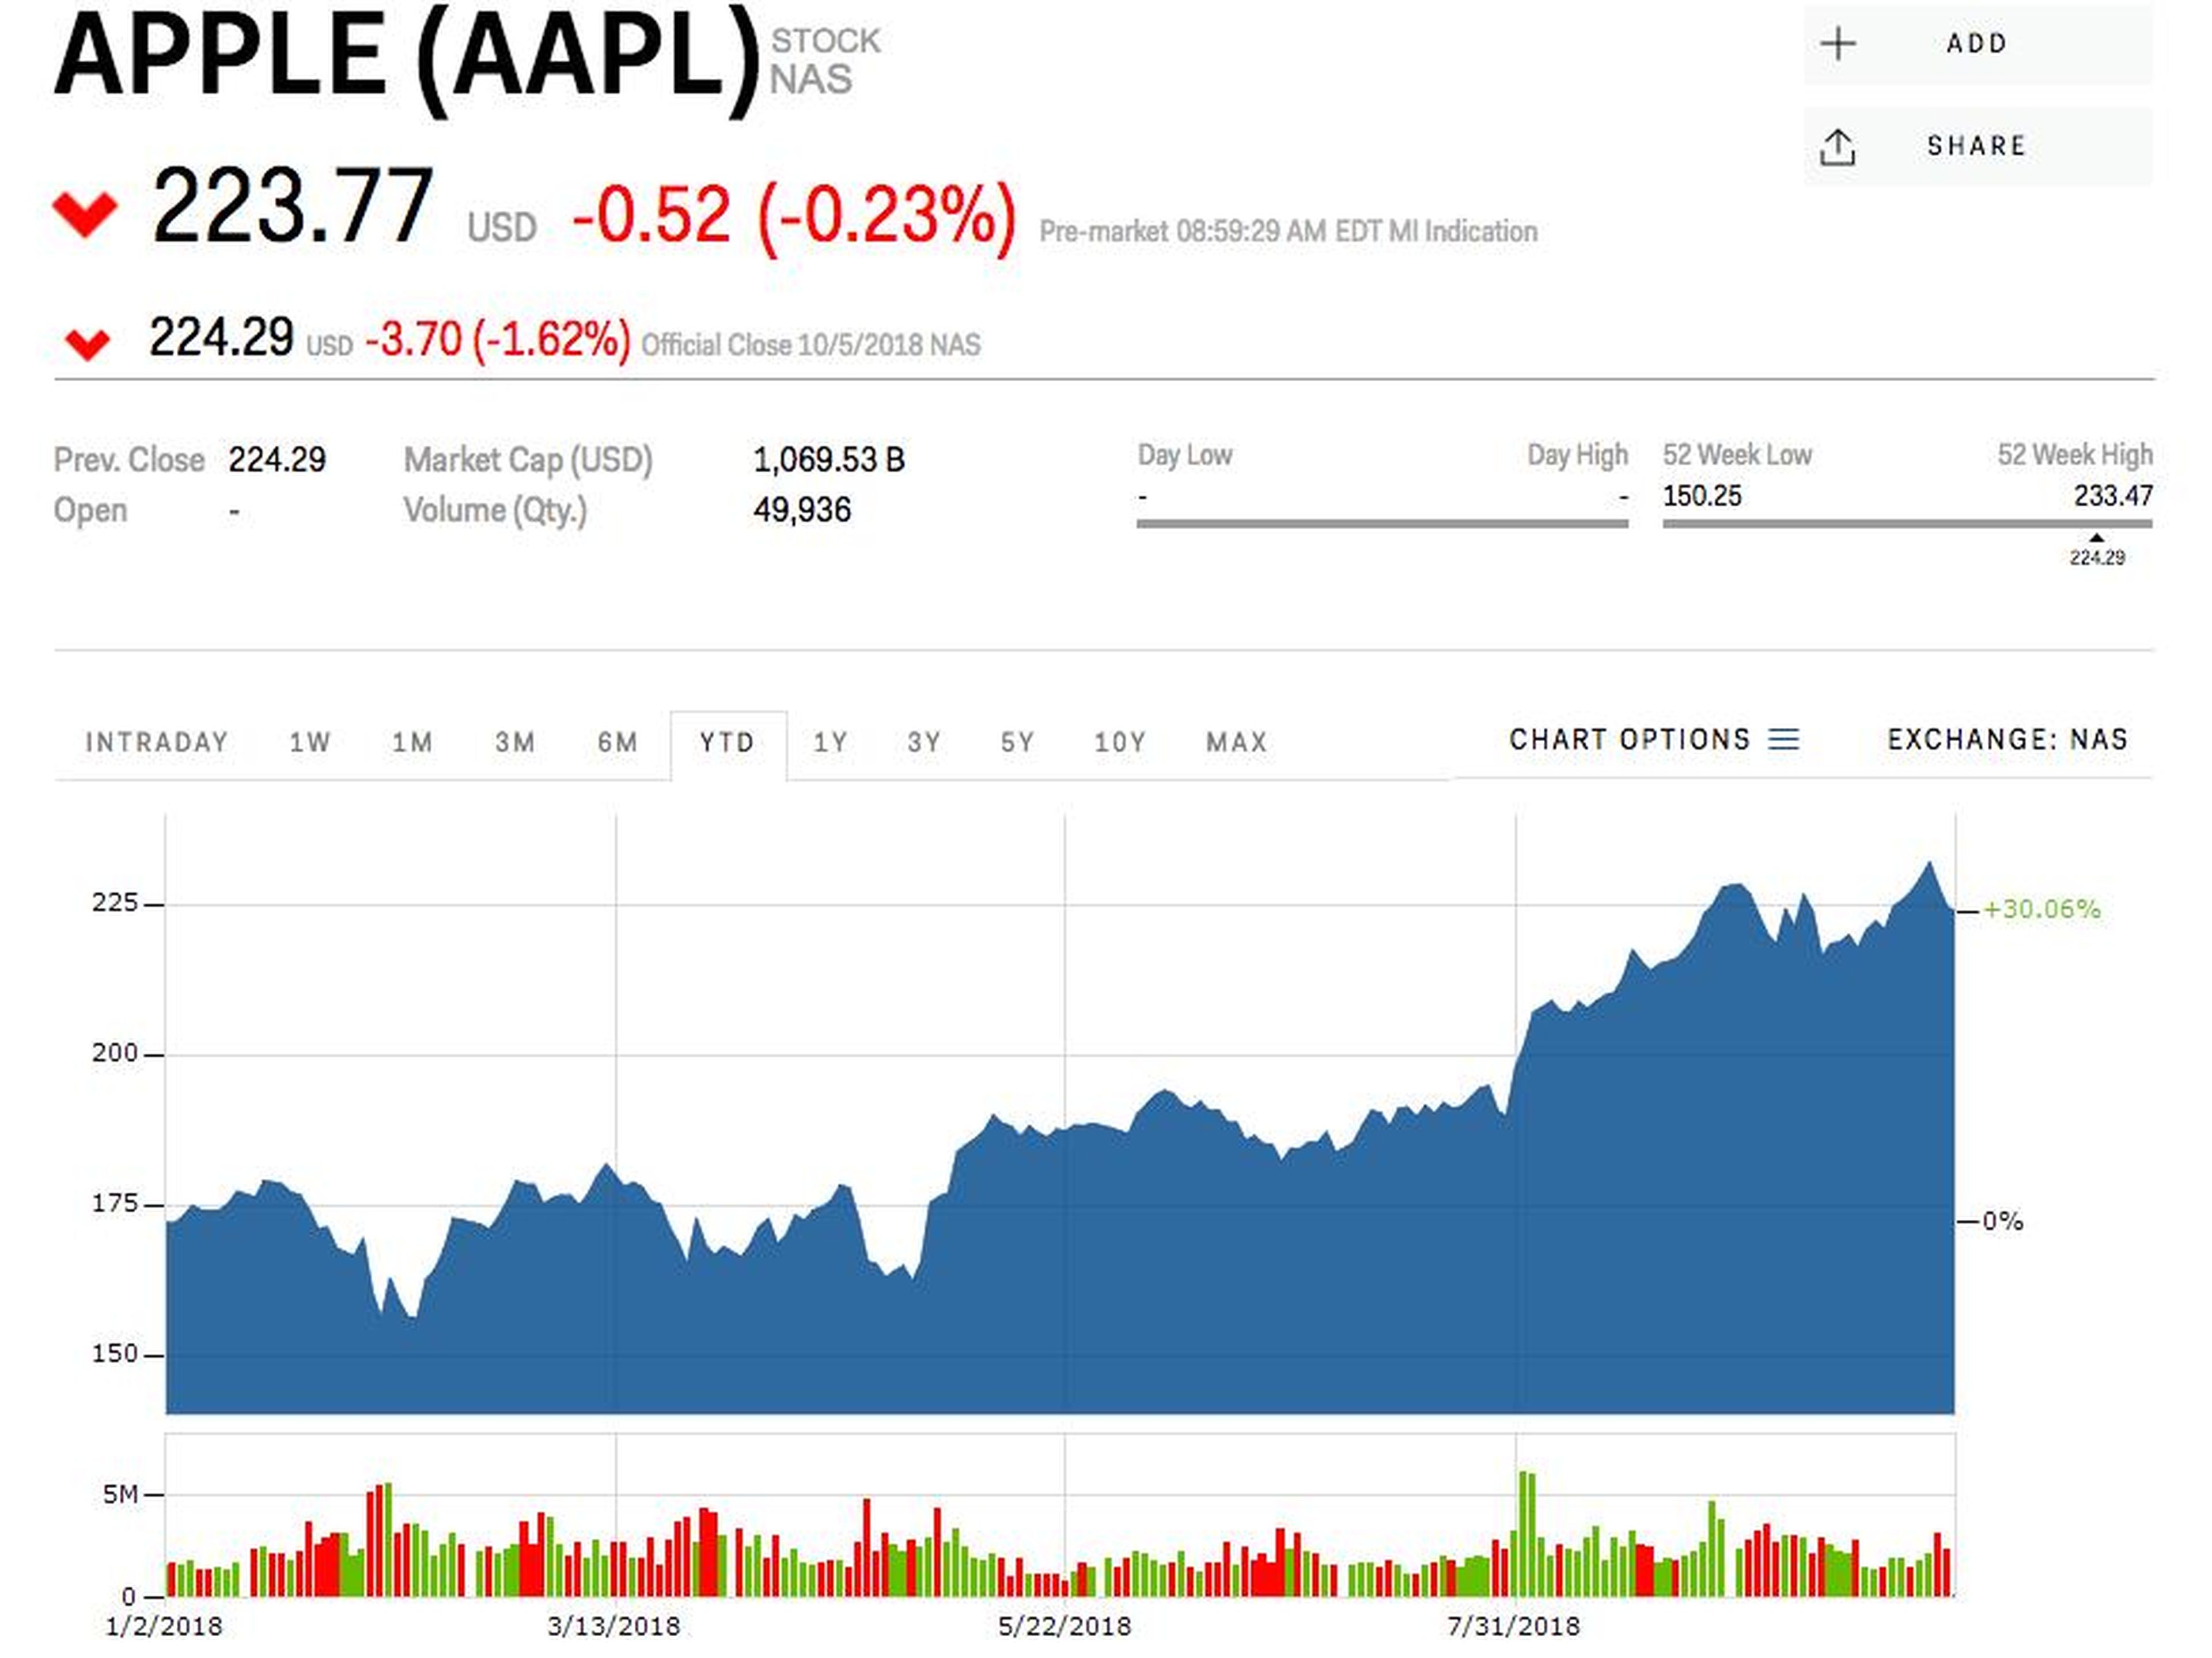 RBC: Here's why Apple's stock is at an 'attractive entry point'